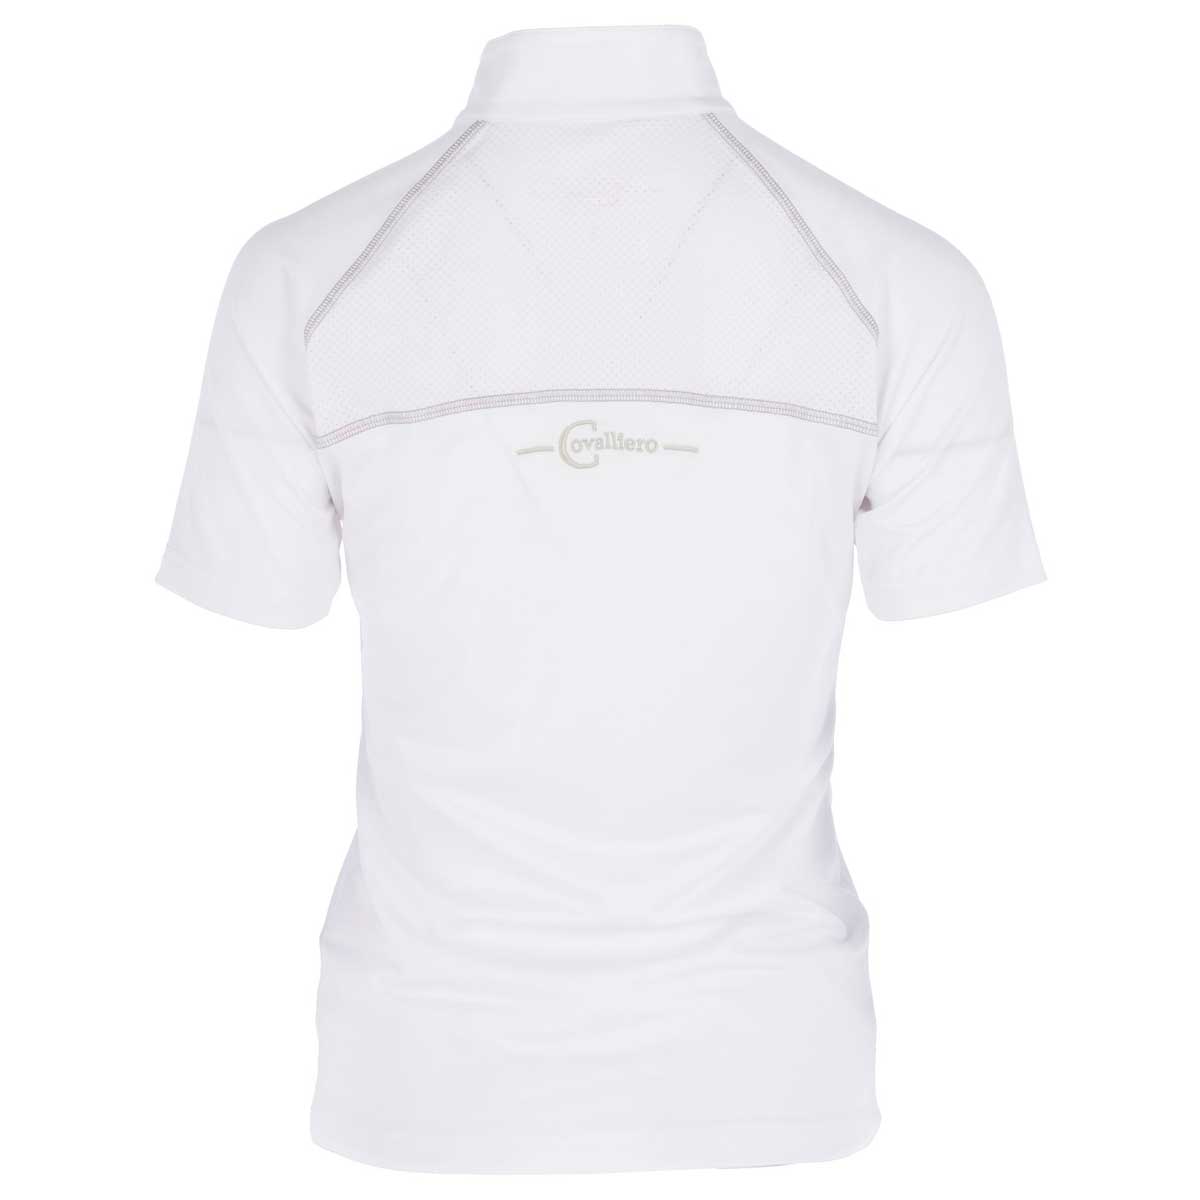 Covalliero Competition Shirt Valentina S